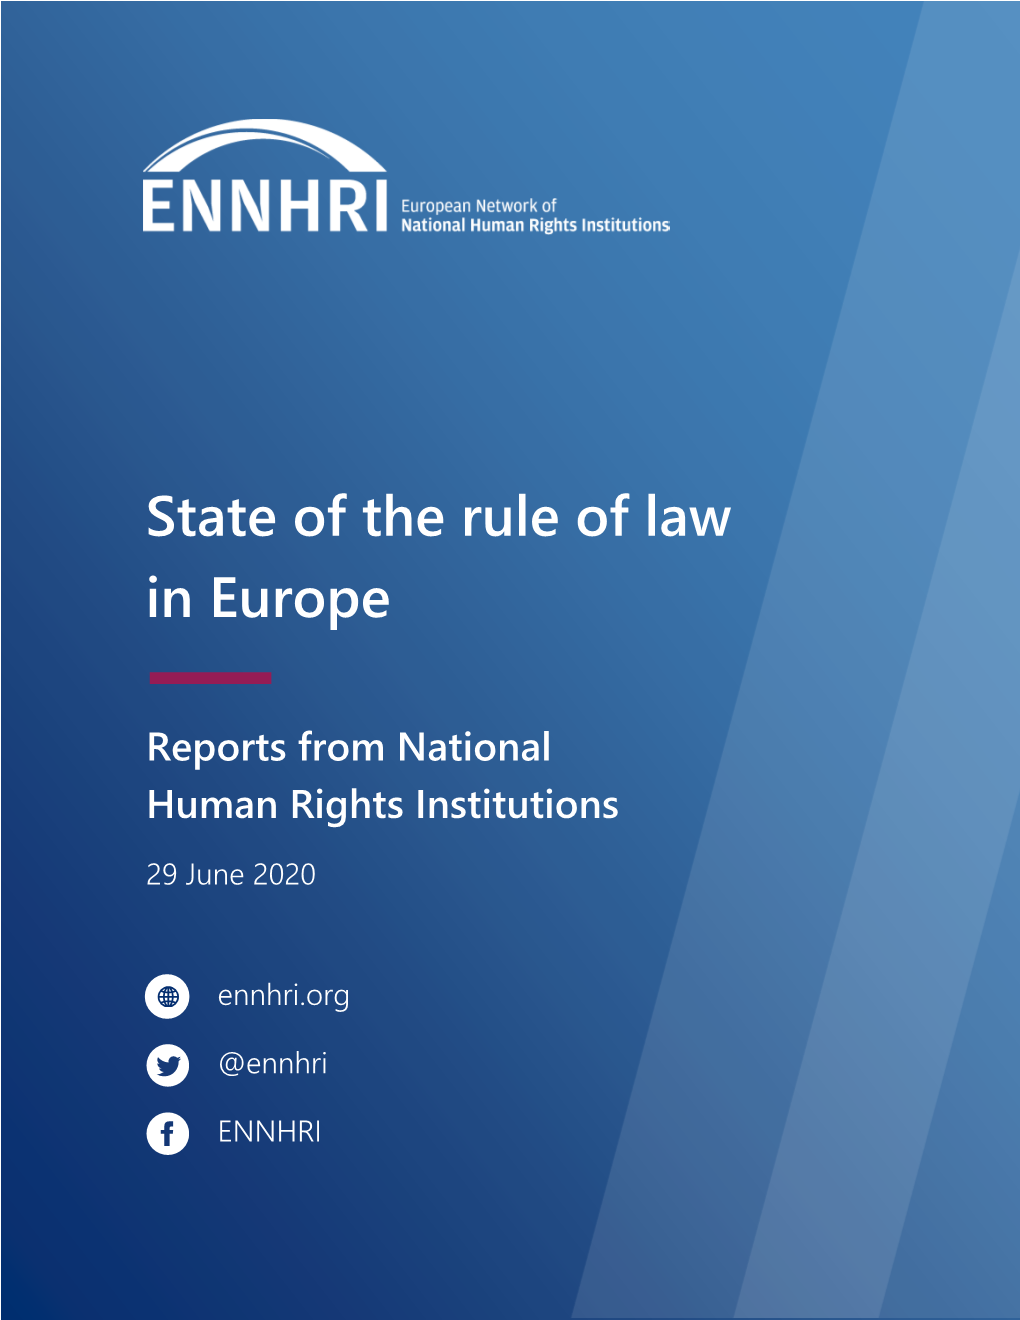 State of the Rule of Law in Europe